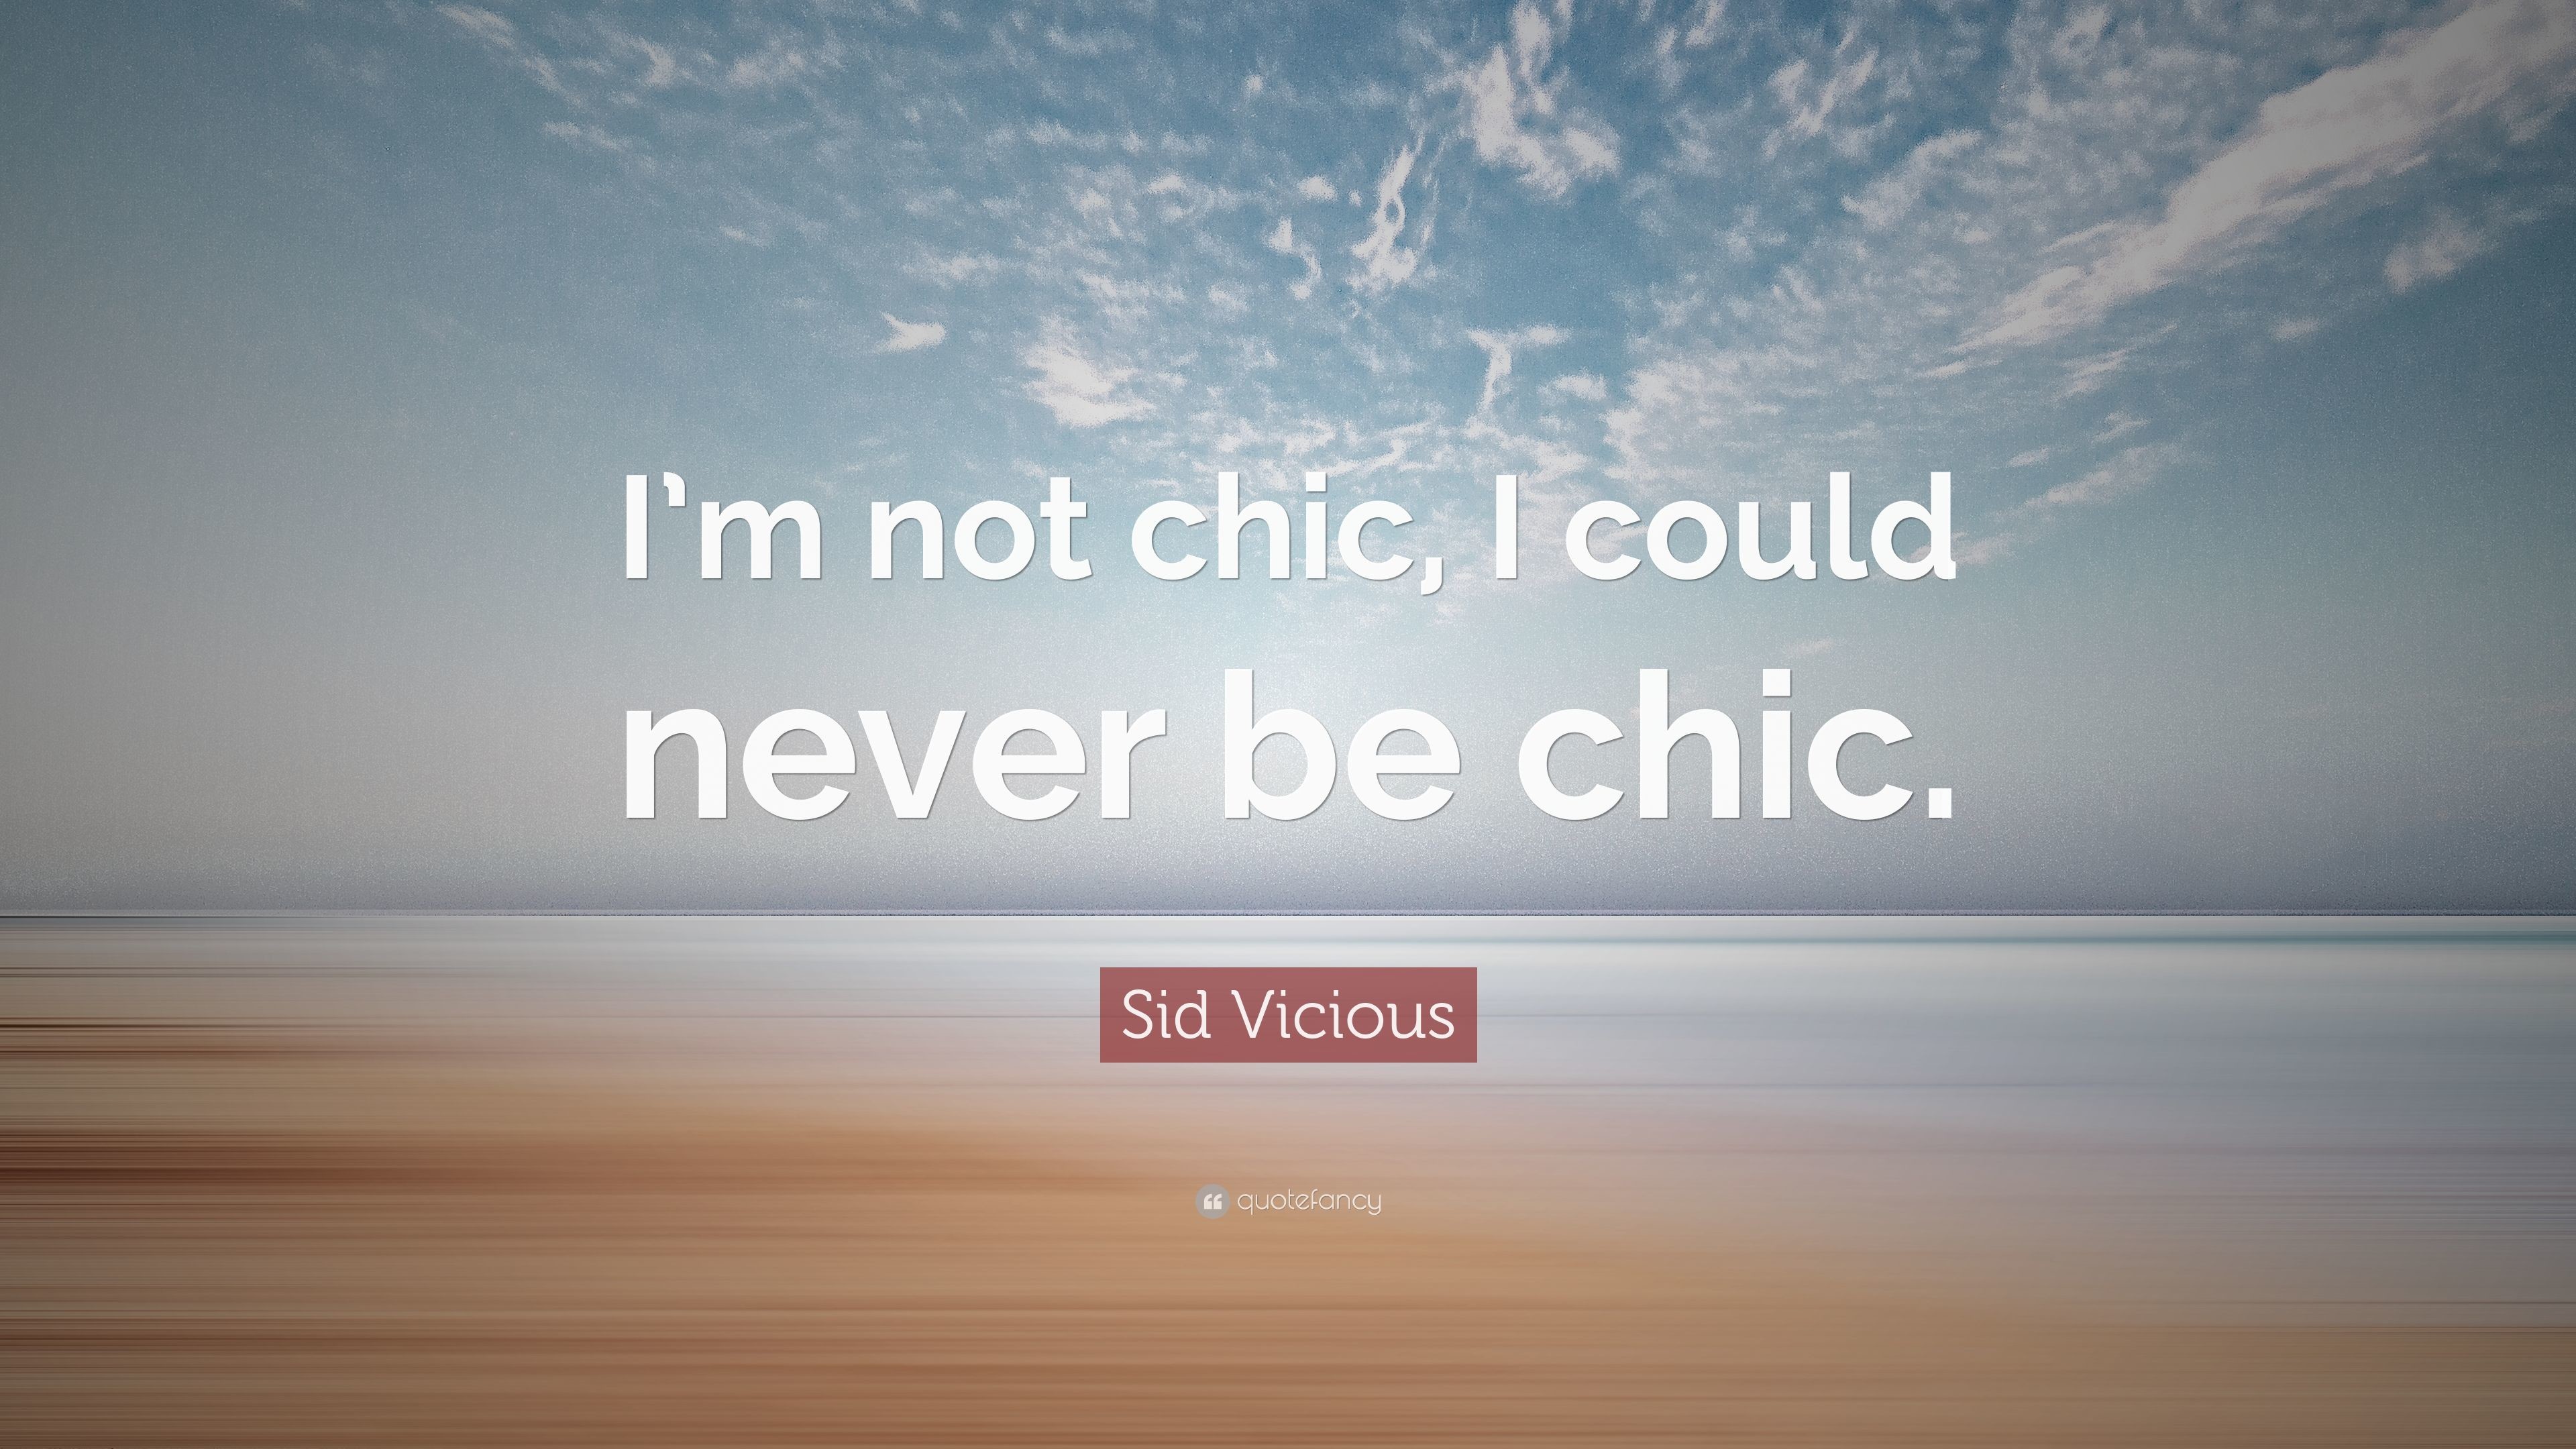 3840x2160 Sid Vicious Quote: “I'm not chic, I could never be chic